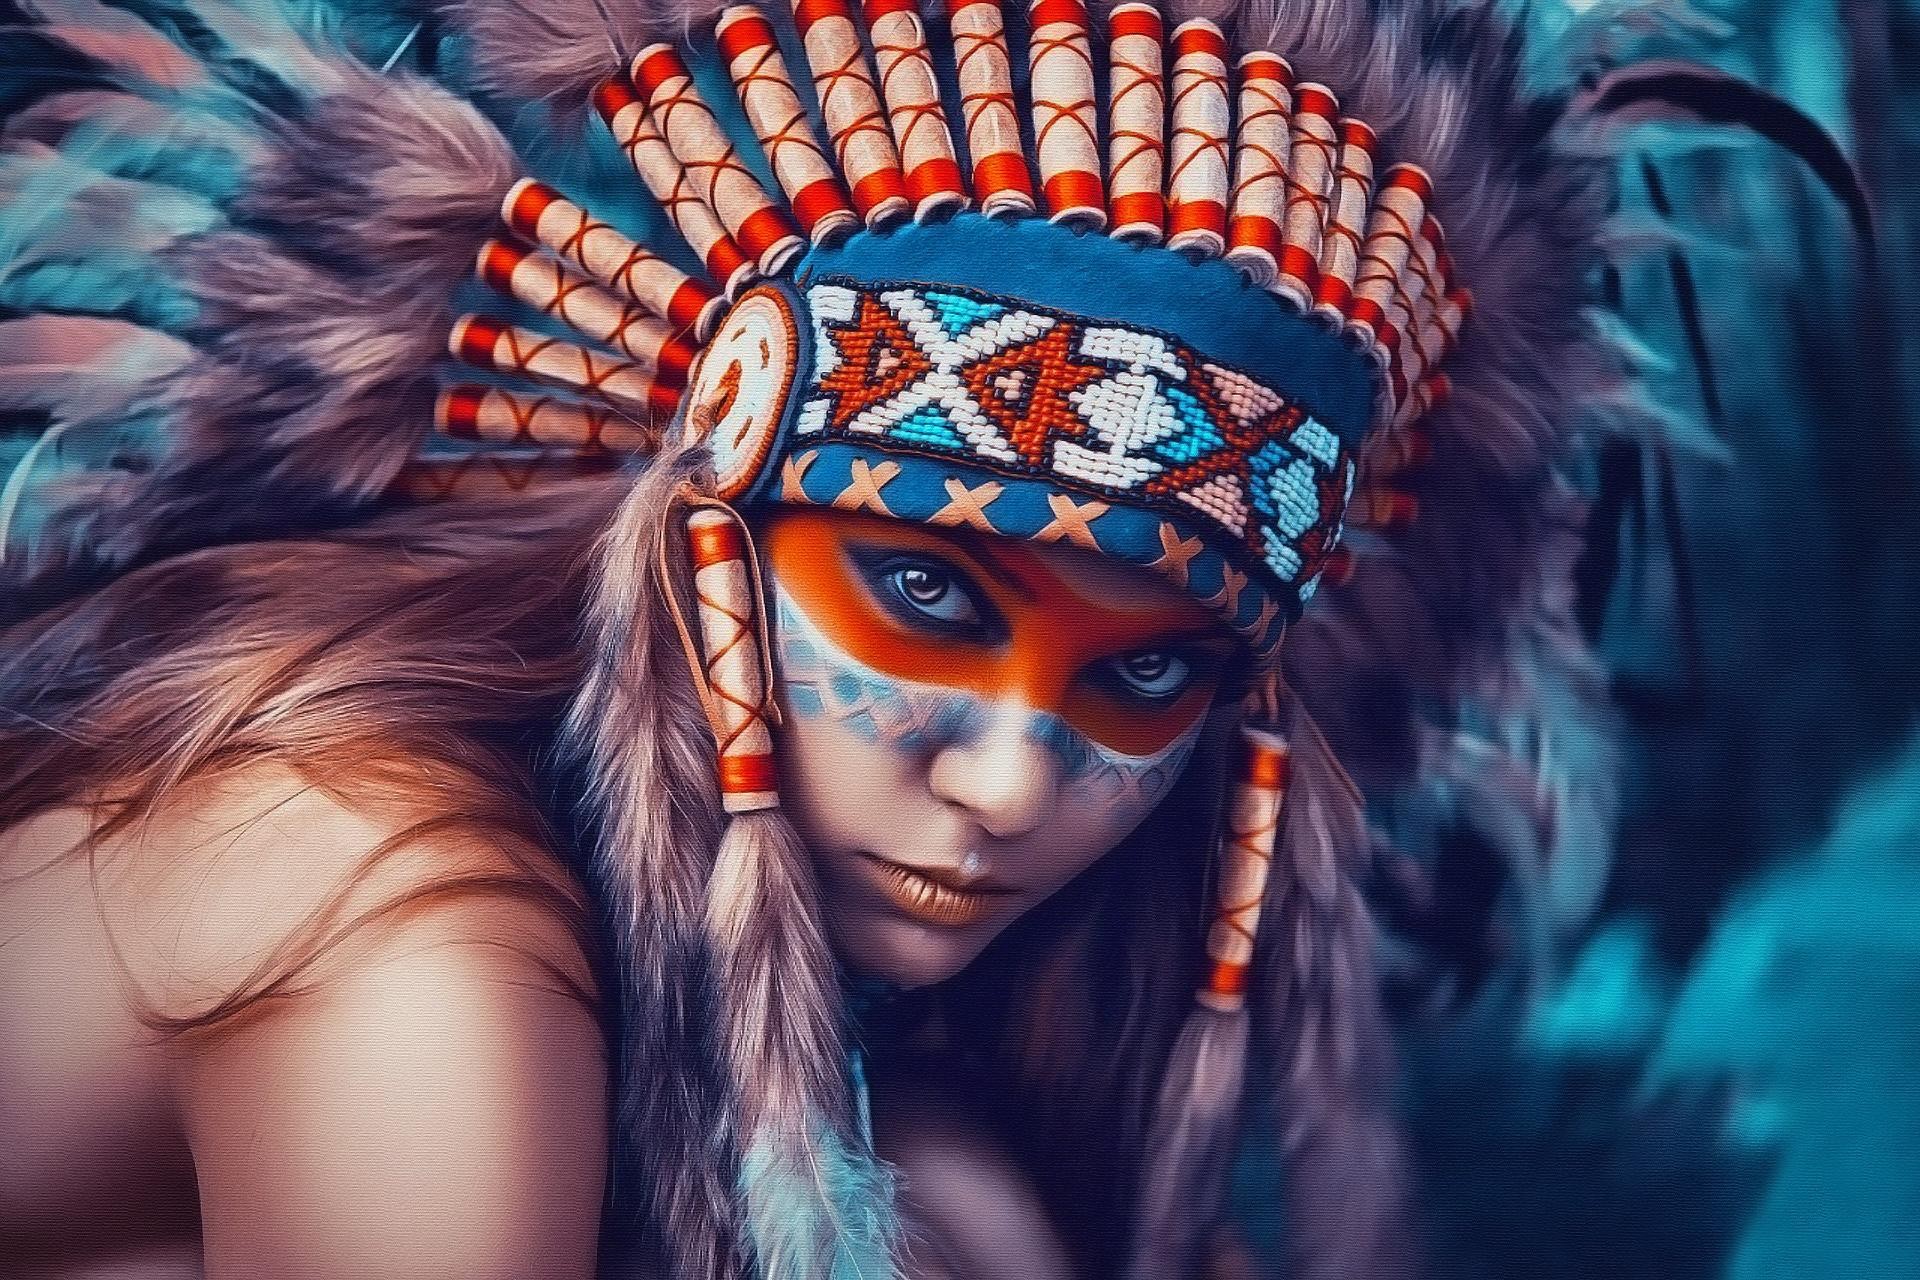 women, Native Americans, Eyes, Artwork, Headdress, Colorful, Painting, Face...